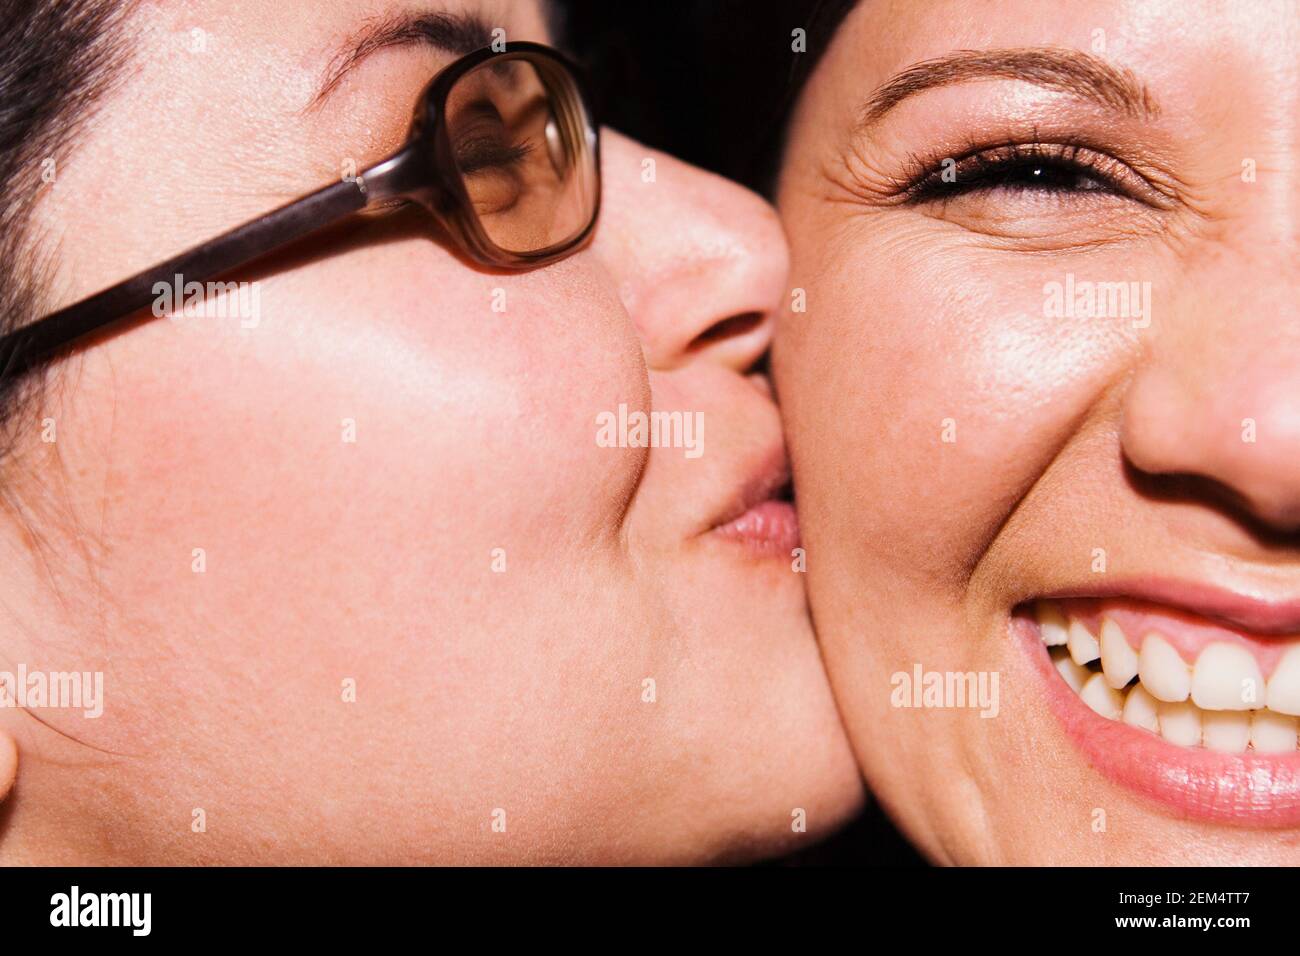 Portrait of a young woman kissed by her friend on her cheek Stock Photo